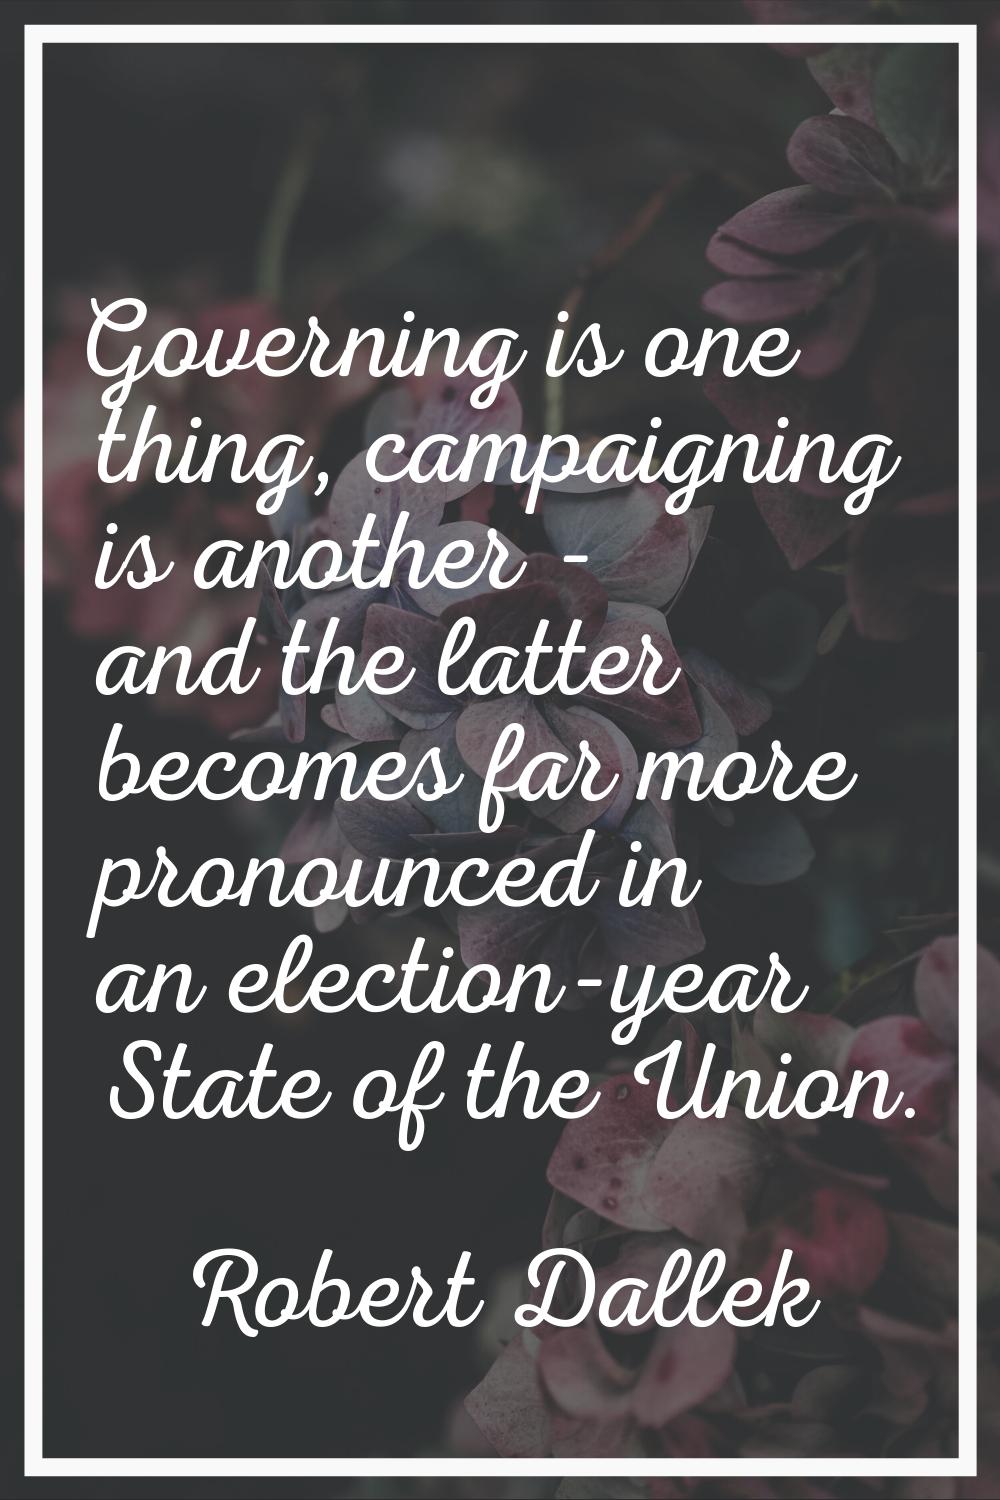 Governing is one thing, campaigning is another - and the latter becomes far more pronounced in an e